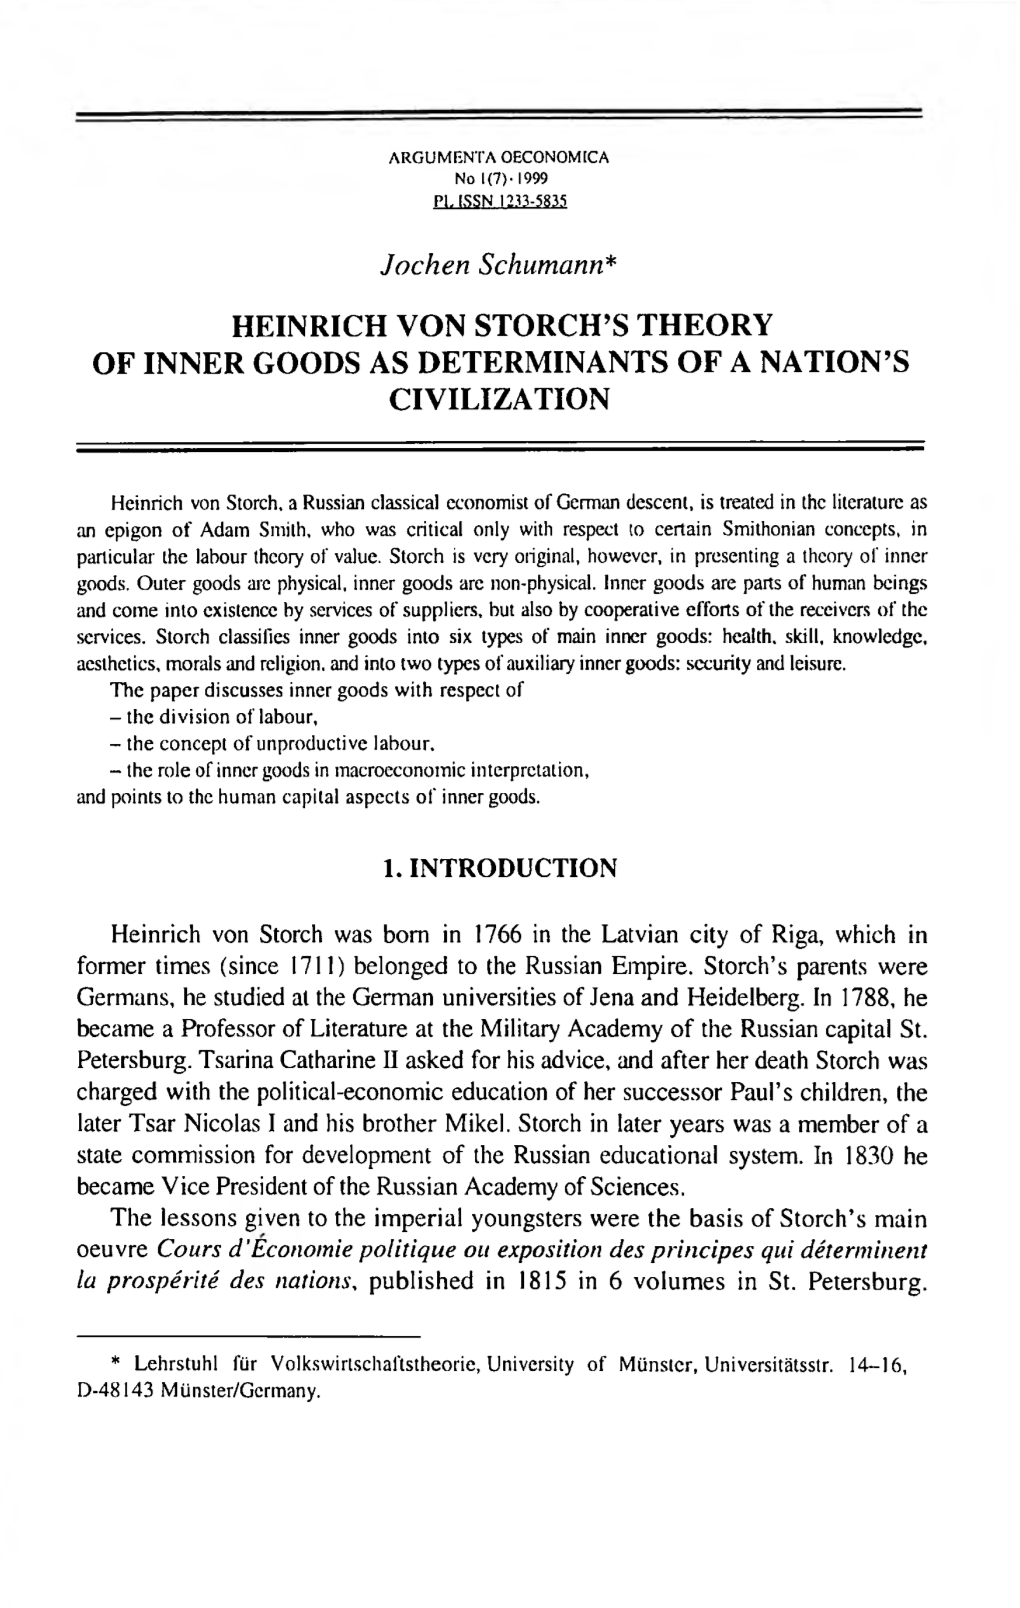 Heinrich Von Storch's Theory of Inner Goods As Determinants of a Nation's